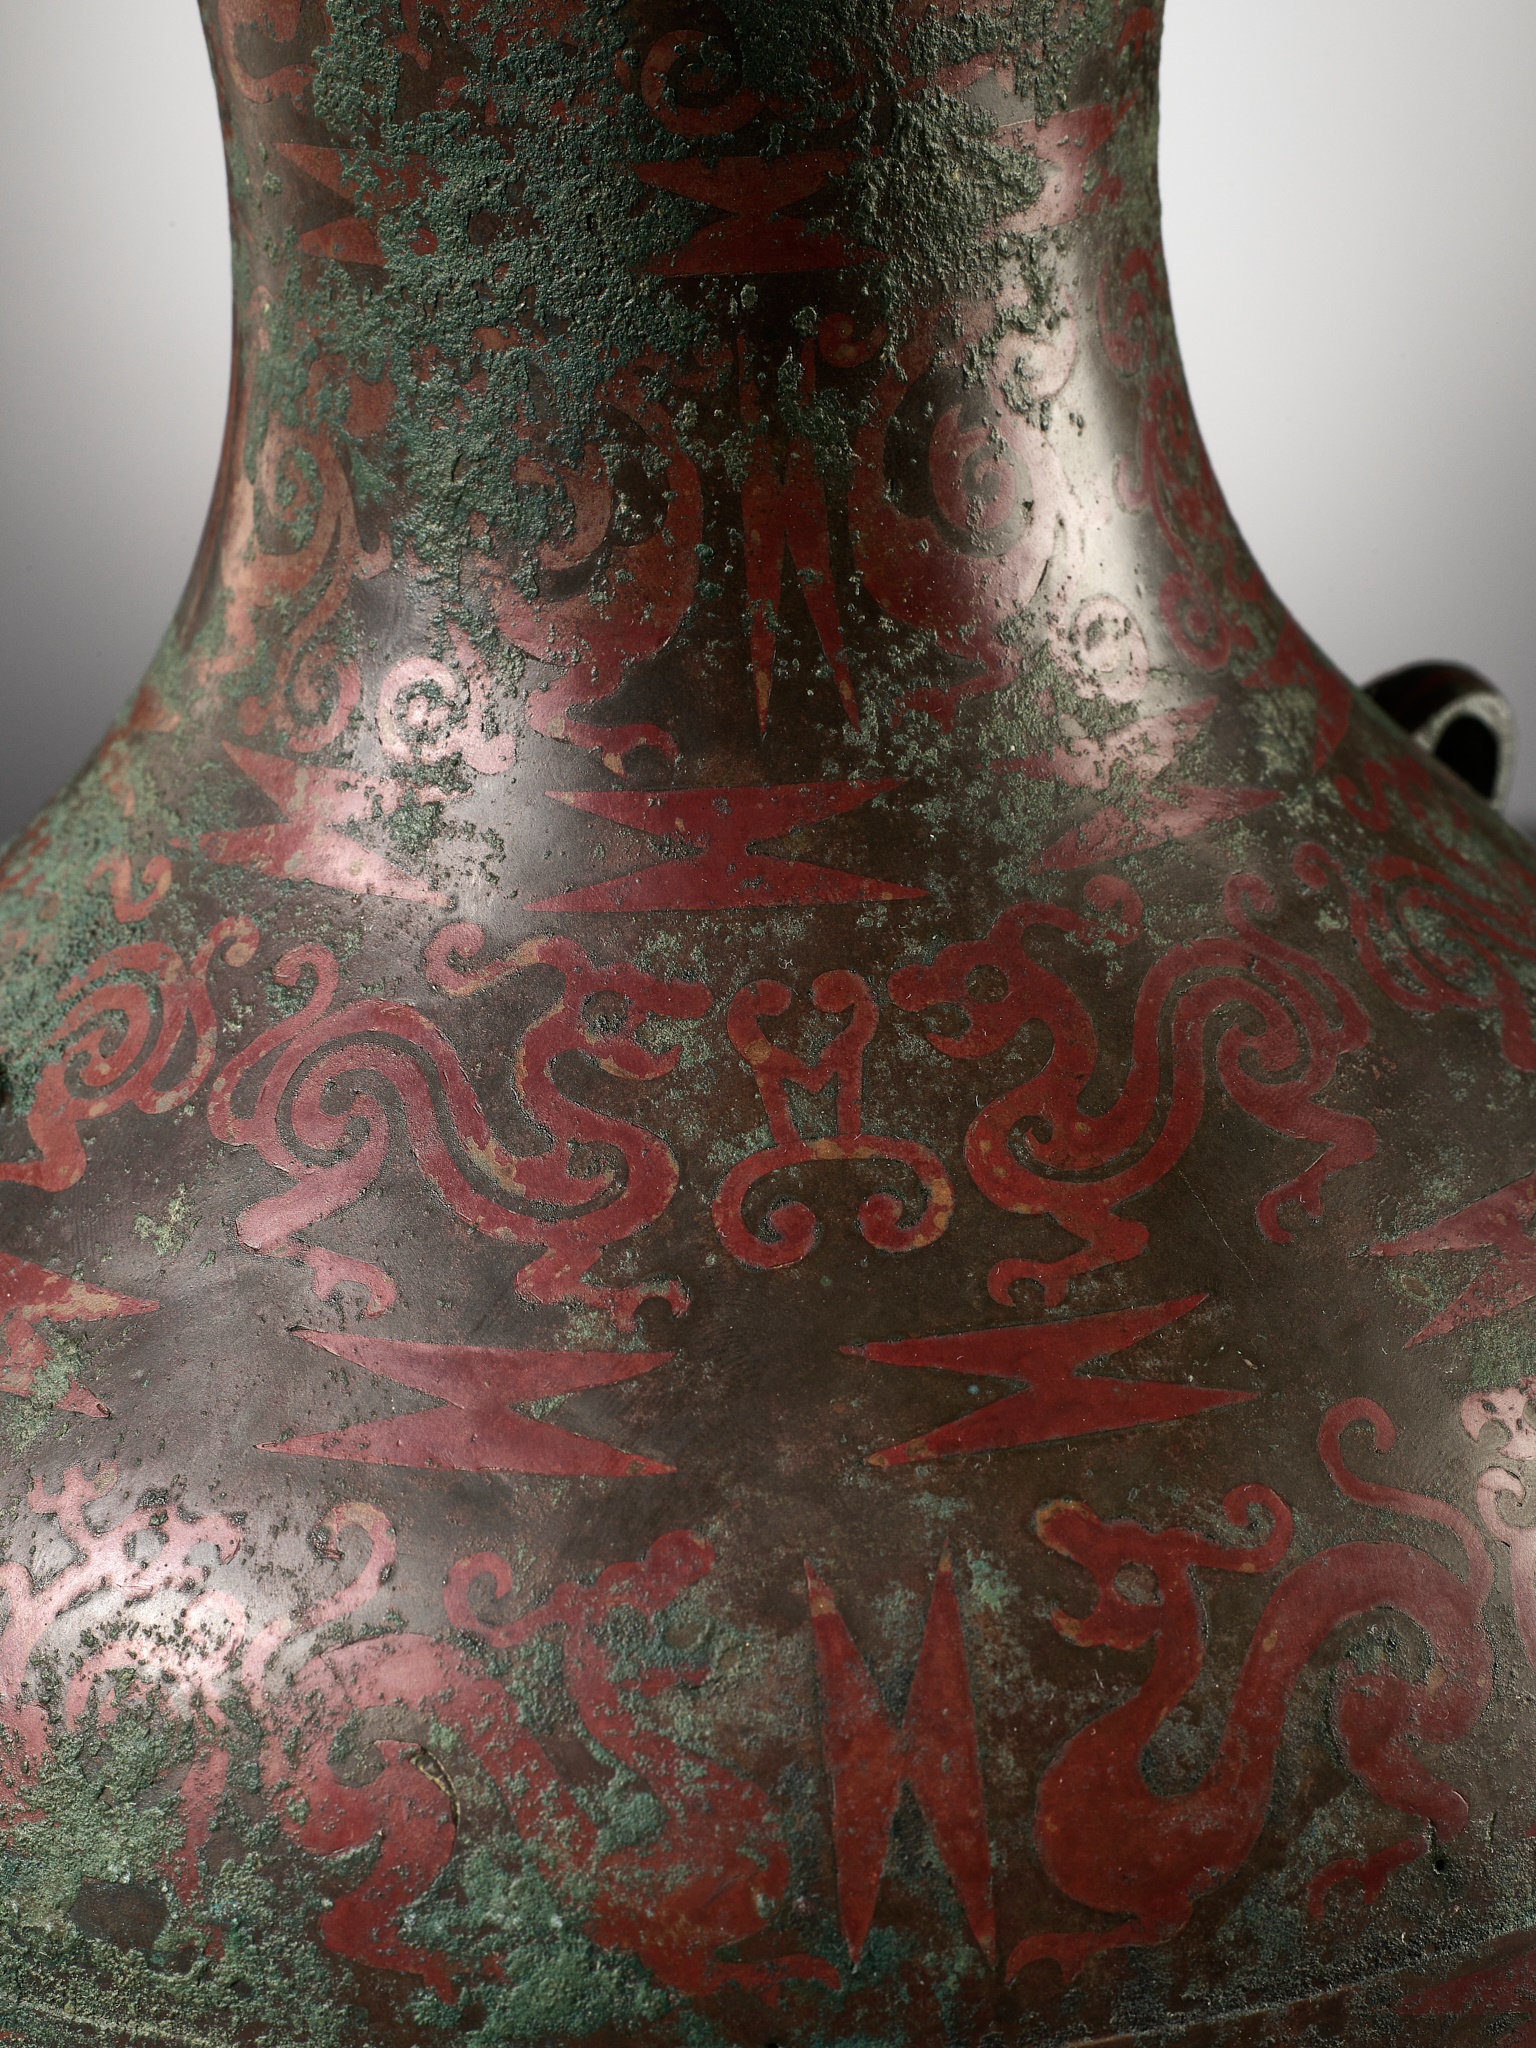 A COPPER-INLAID BRONZE RITUAL WINE VESSEL AND COVER, HU, EASTERN ZHOU DYNASTY - Image 21 of 27